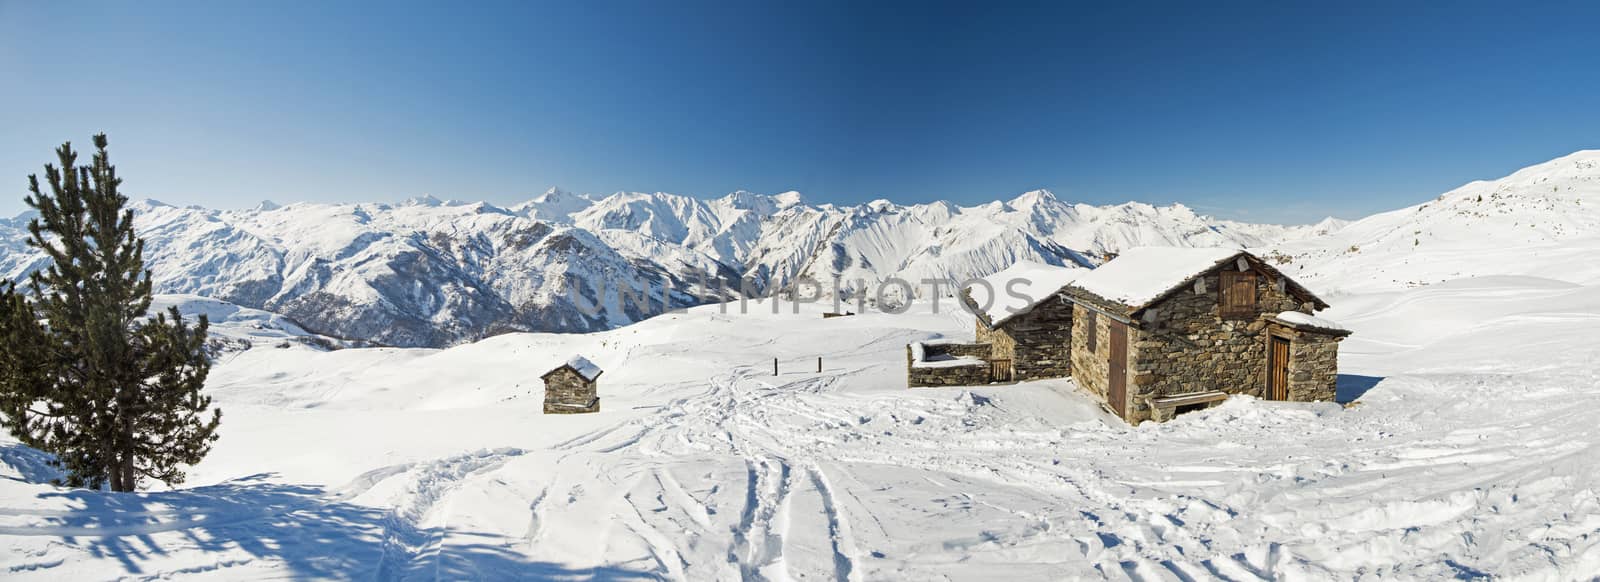 Panoramic view of snow covered mountains in an alpine ski resort with stone building on remote slope